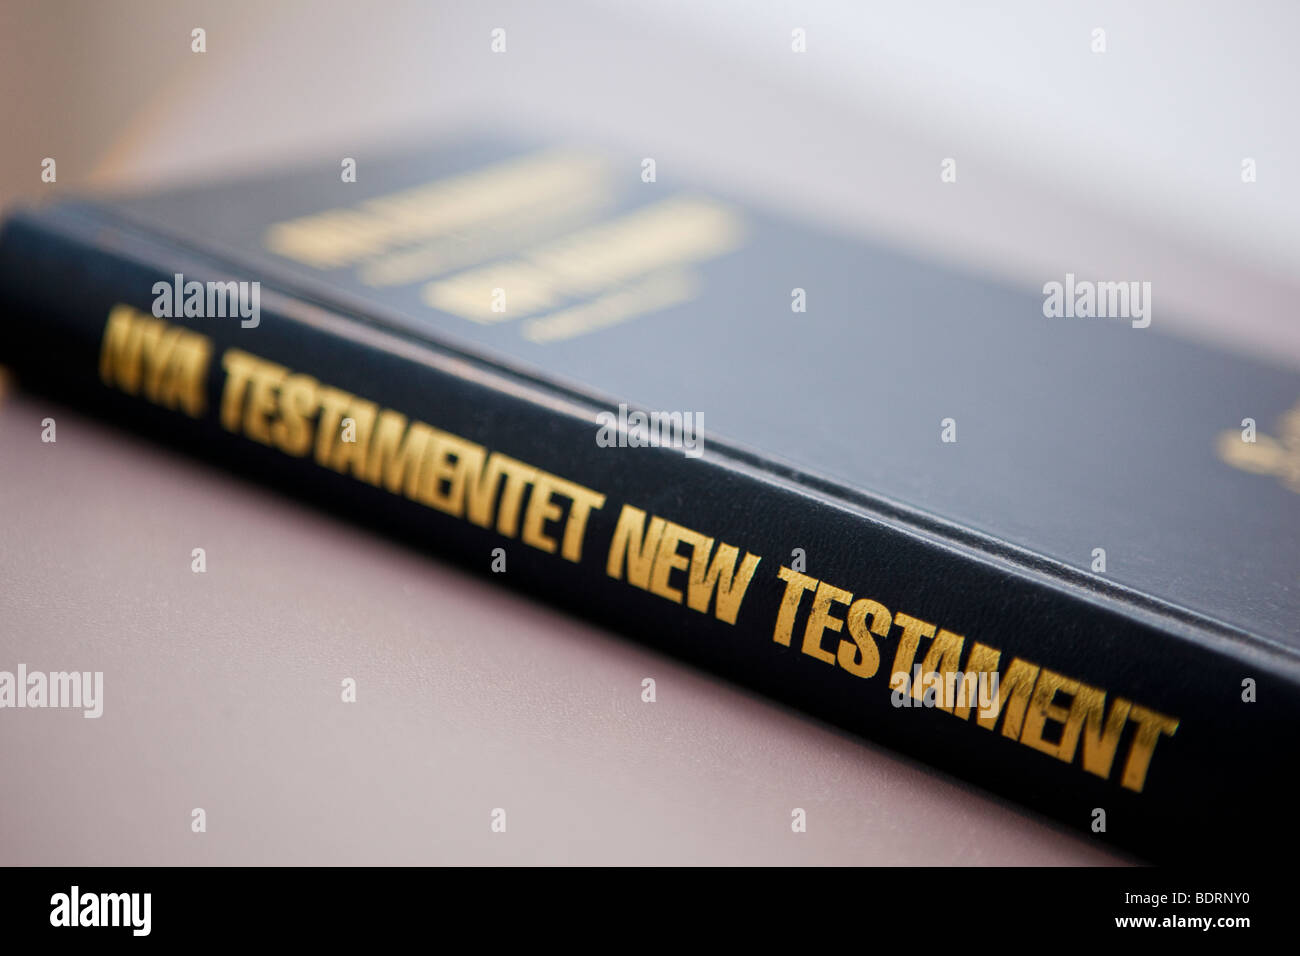 The Holy Scripture Stock Photo